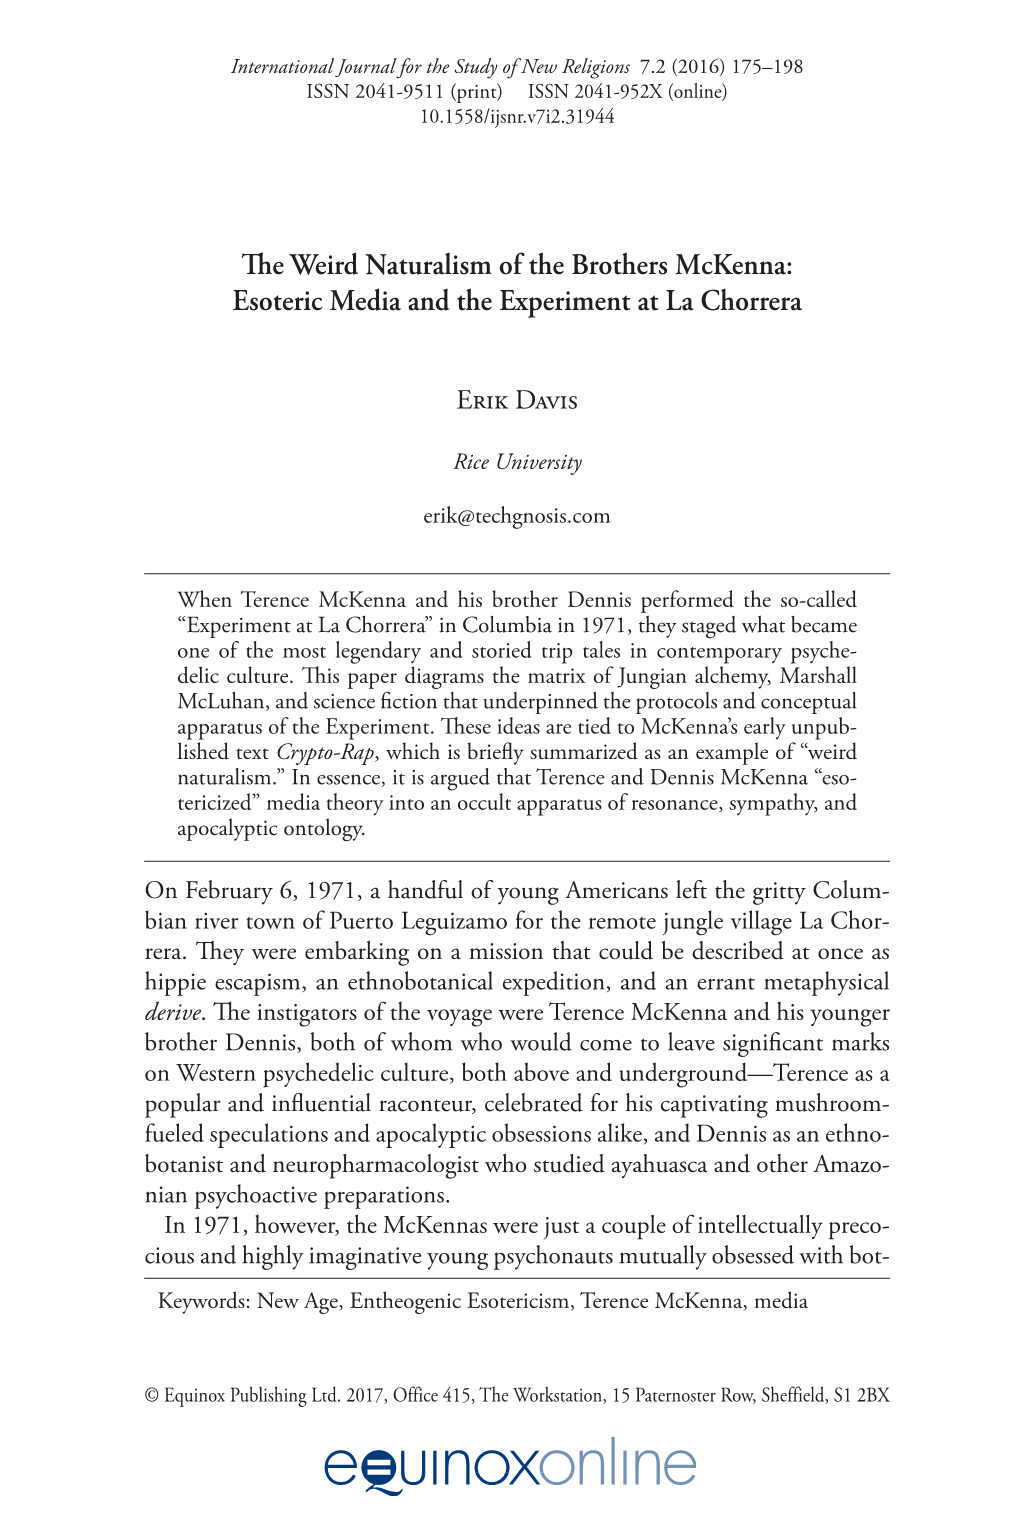 The Weird Naturalism of the Brothers Mckenna: Esoteric Media and the Experiment at La Chorrera